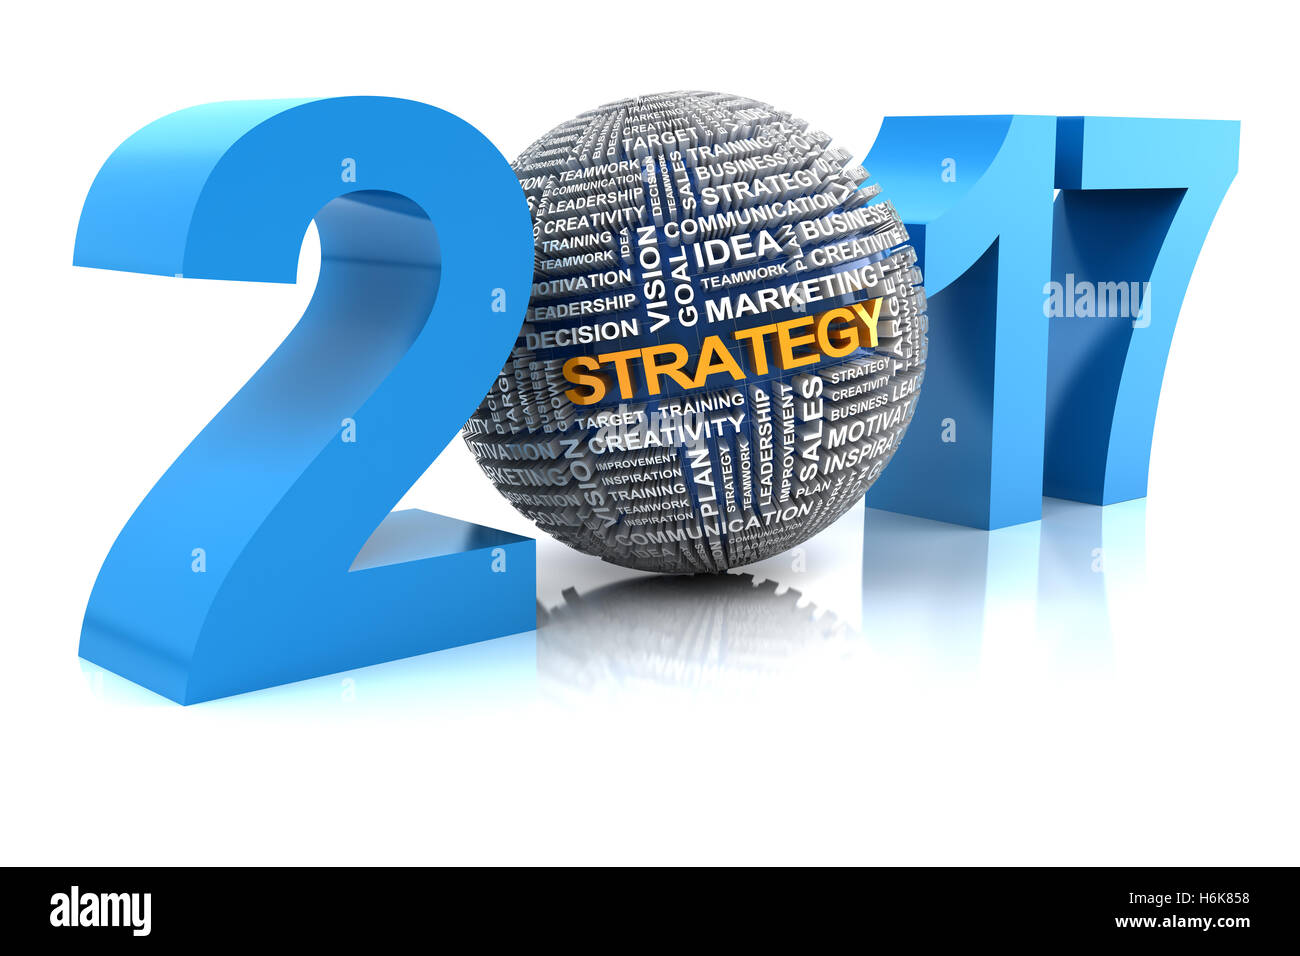 Business strategy in 2017, 3d render Stock Photo